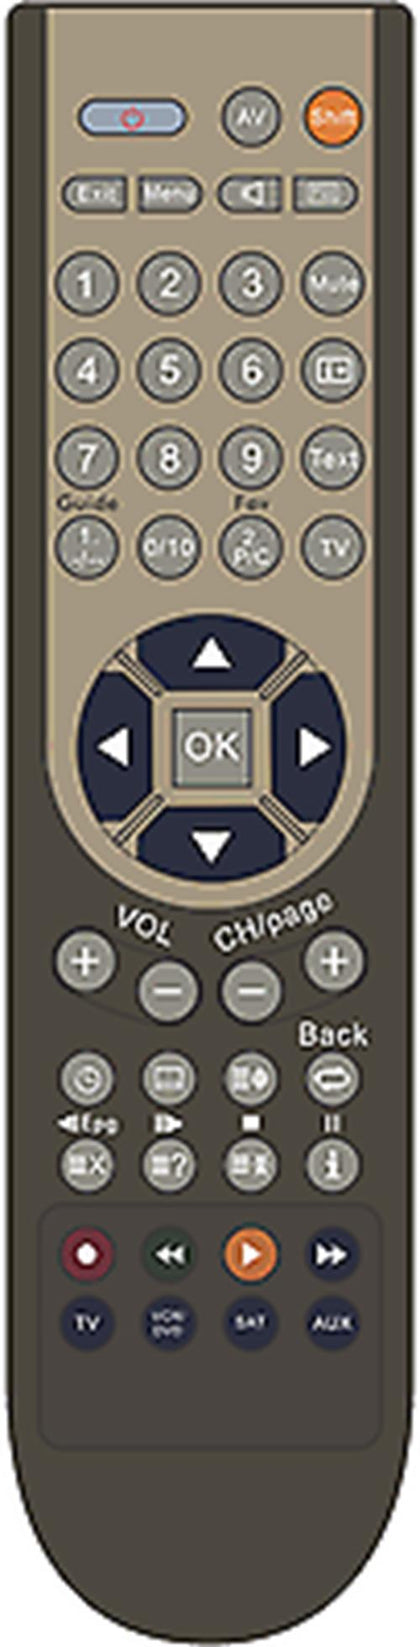 Replacement Remote Control for Panasonic DMP-BD30EE-K